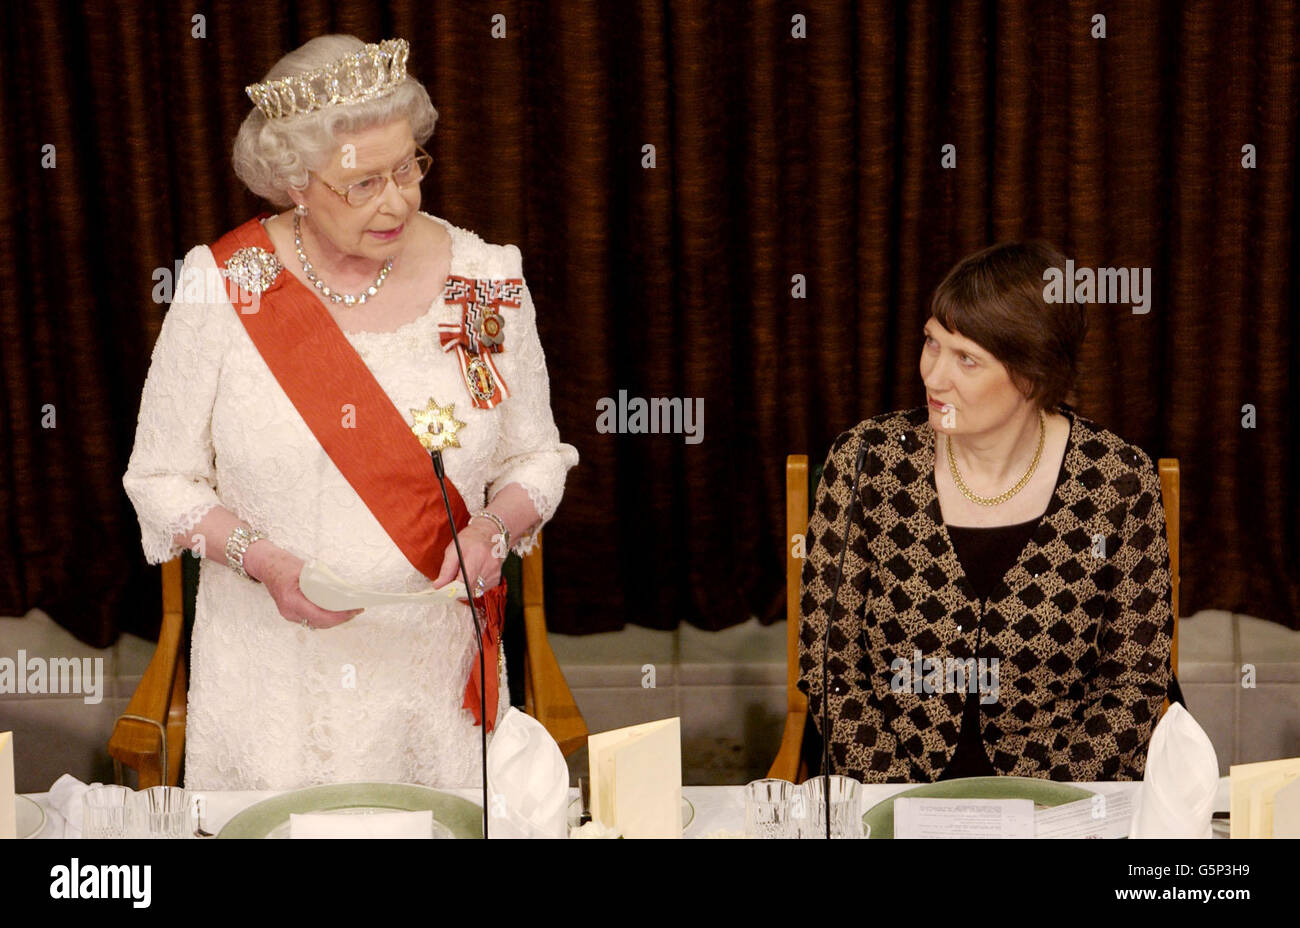 Britain's Queen Elizabeth II (left) stands next to New Zealand Prime Minister Helen Clark as she addresses a State Dinner at Parliament House, Wellington, New Zealand, during a visit to the country. * The Queen said it had been a privilege and a pleasure to serve as the country's head of state for the past 50 years and said she looked foreword to continuing to serve to the best of her ability in the years to come. Stock Photo